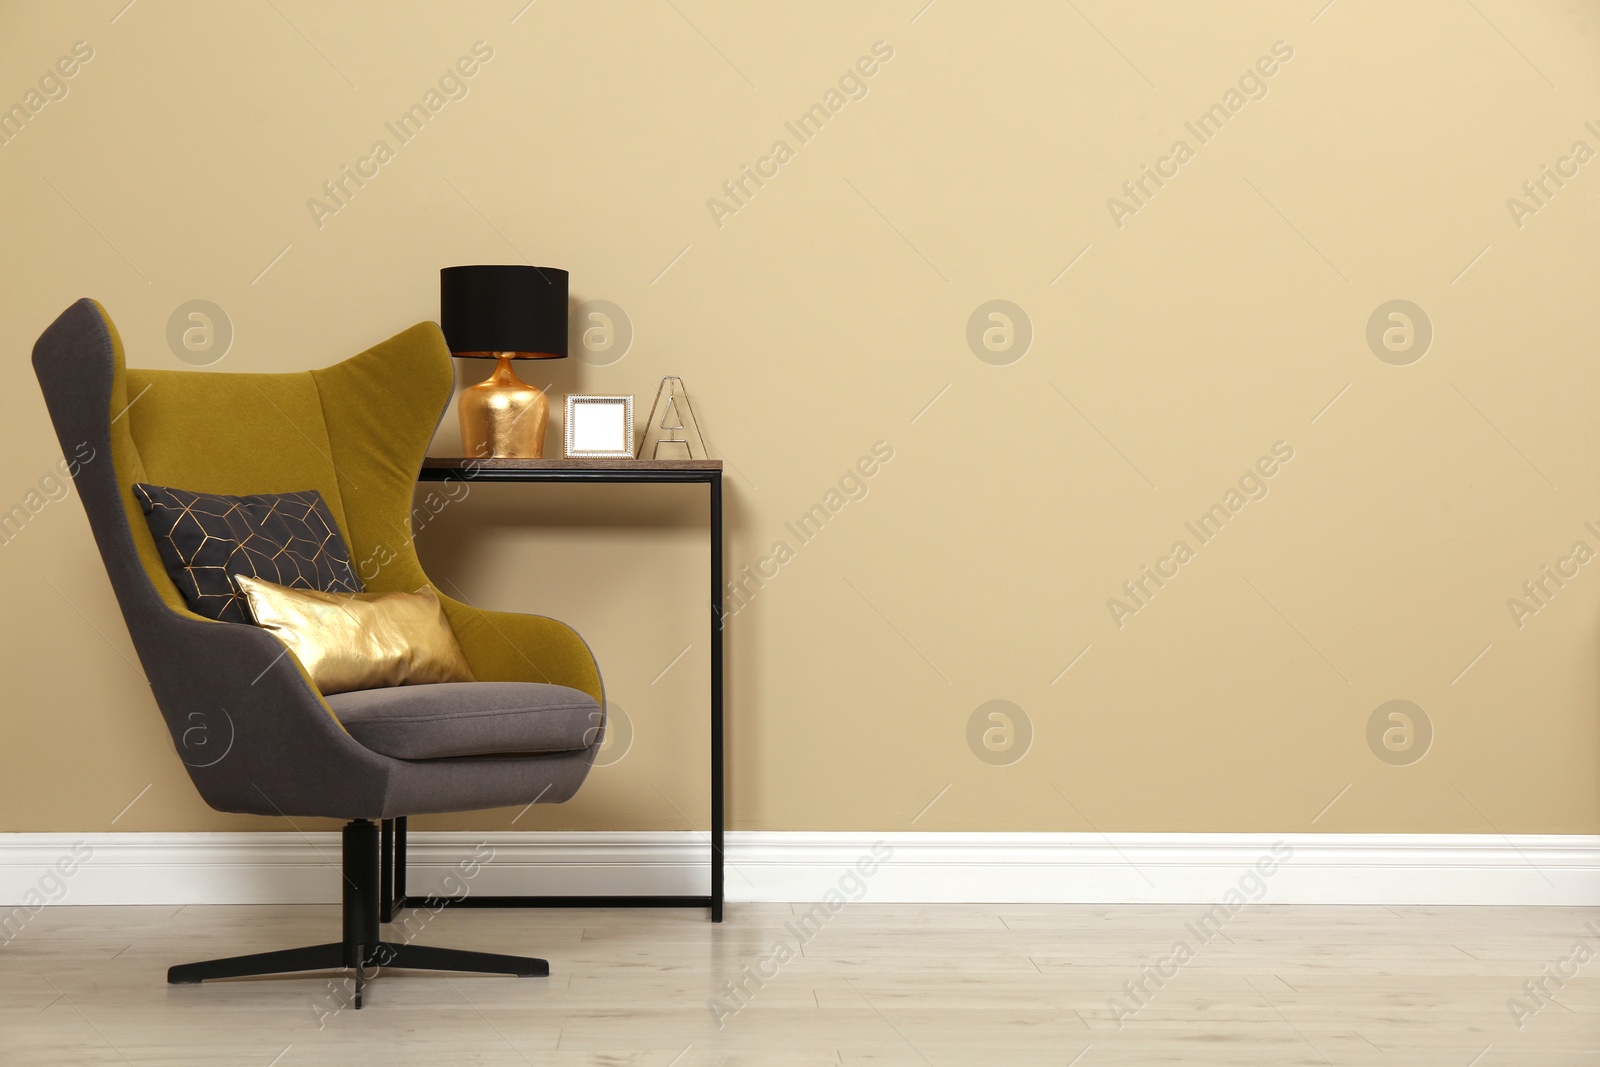 Photo of Armchair and console table near beige wall in room, space for text. Interior design